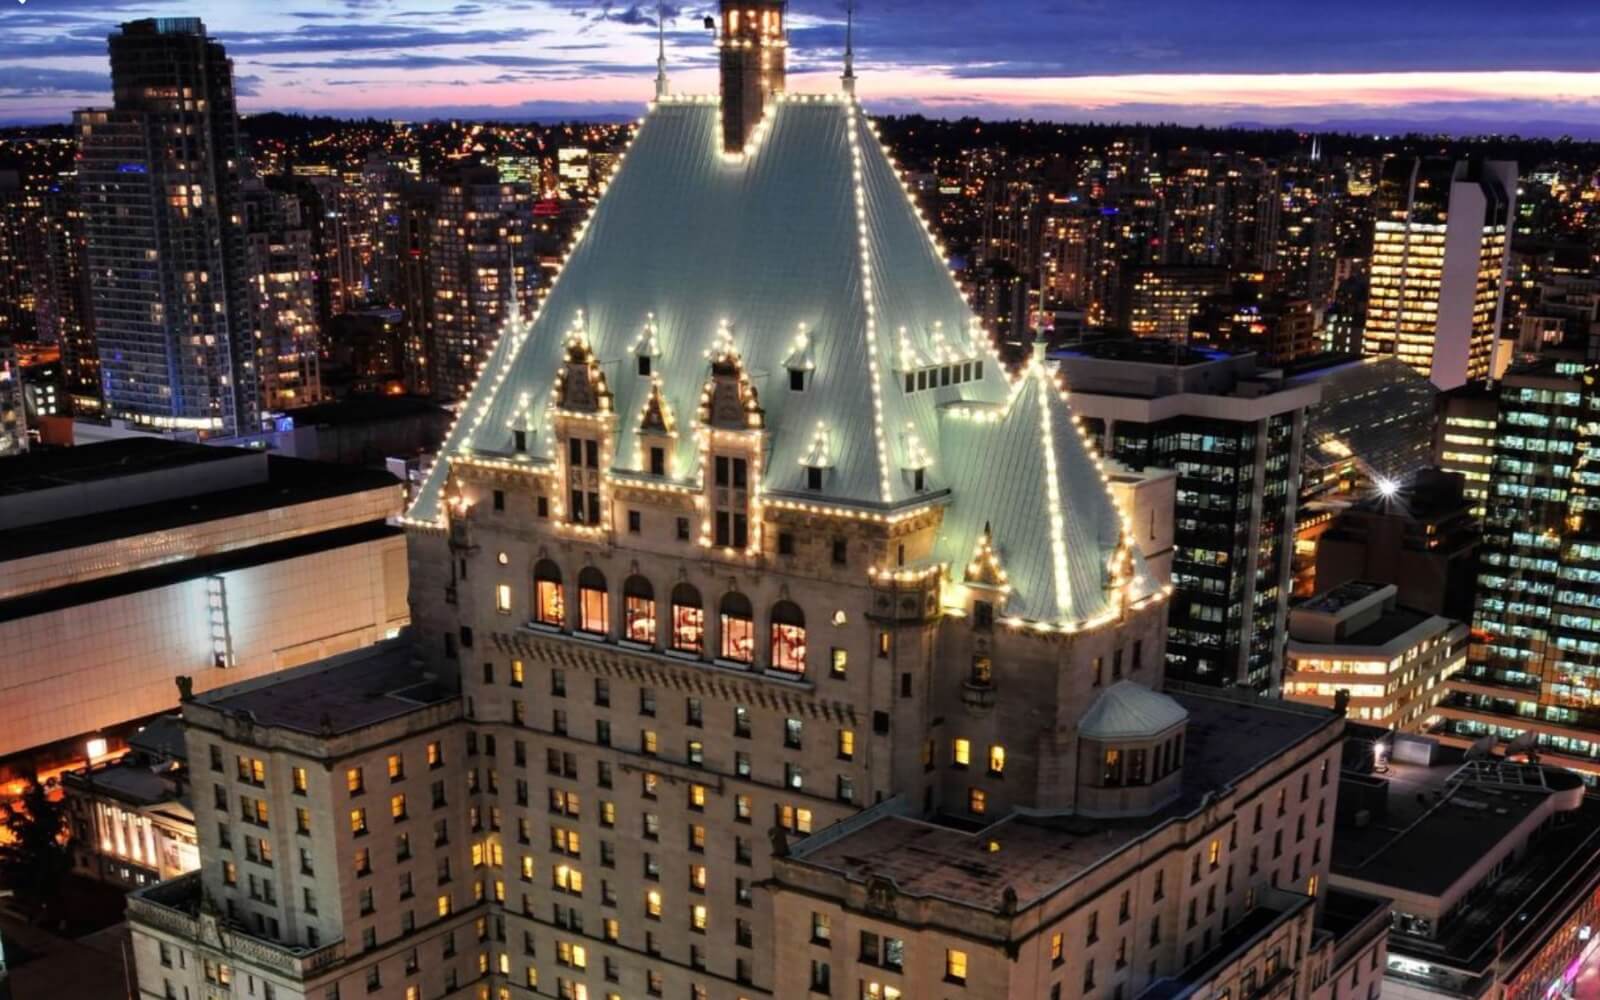 The Fairmont Hotel Vancouver at night